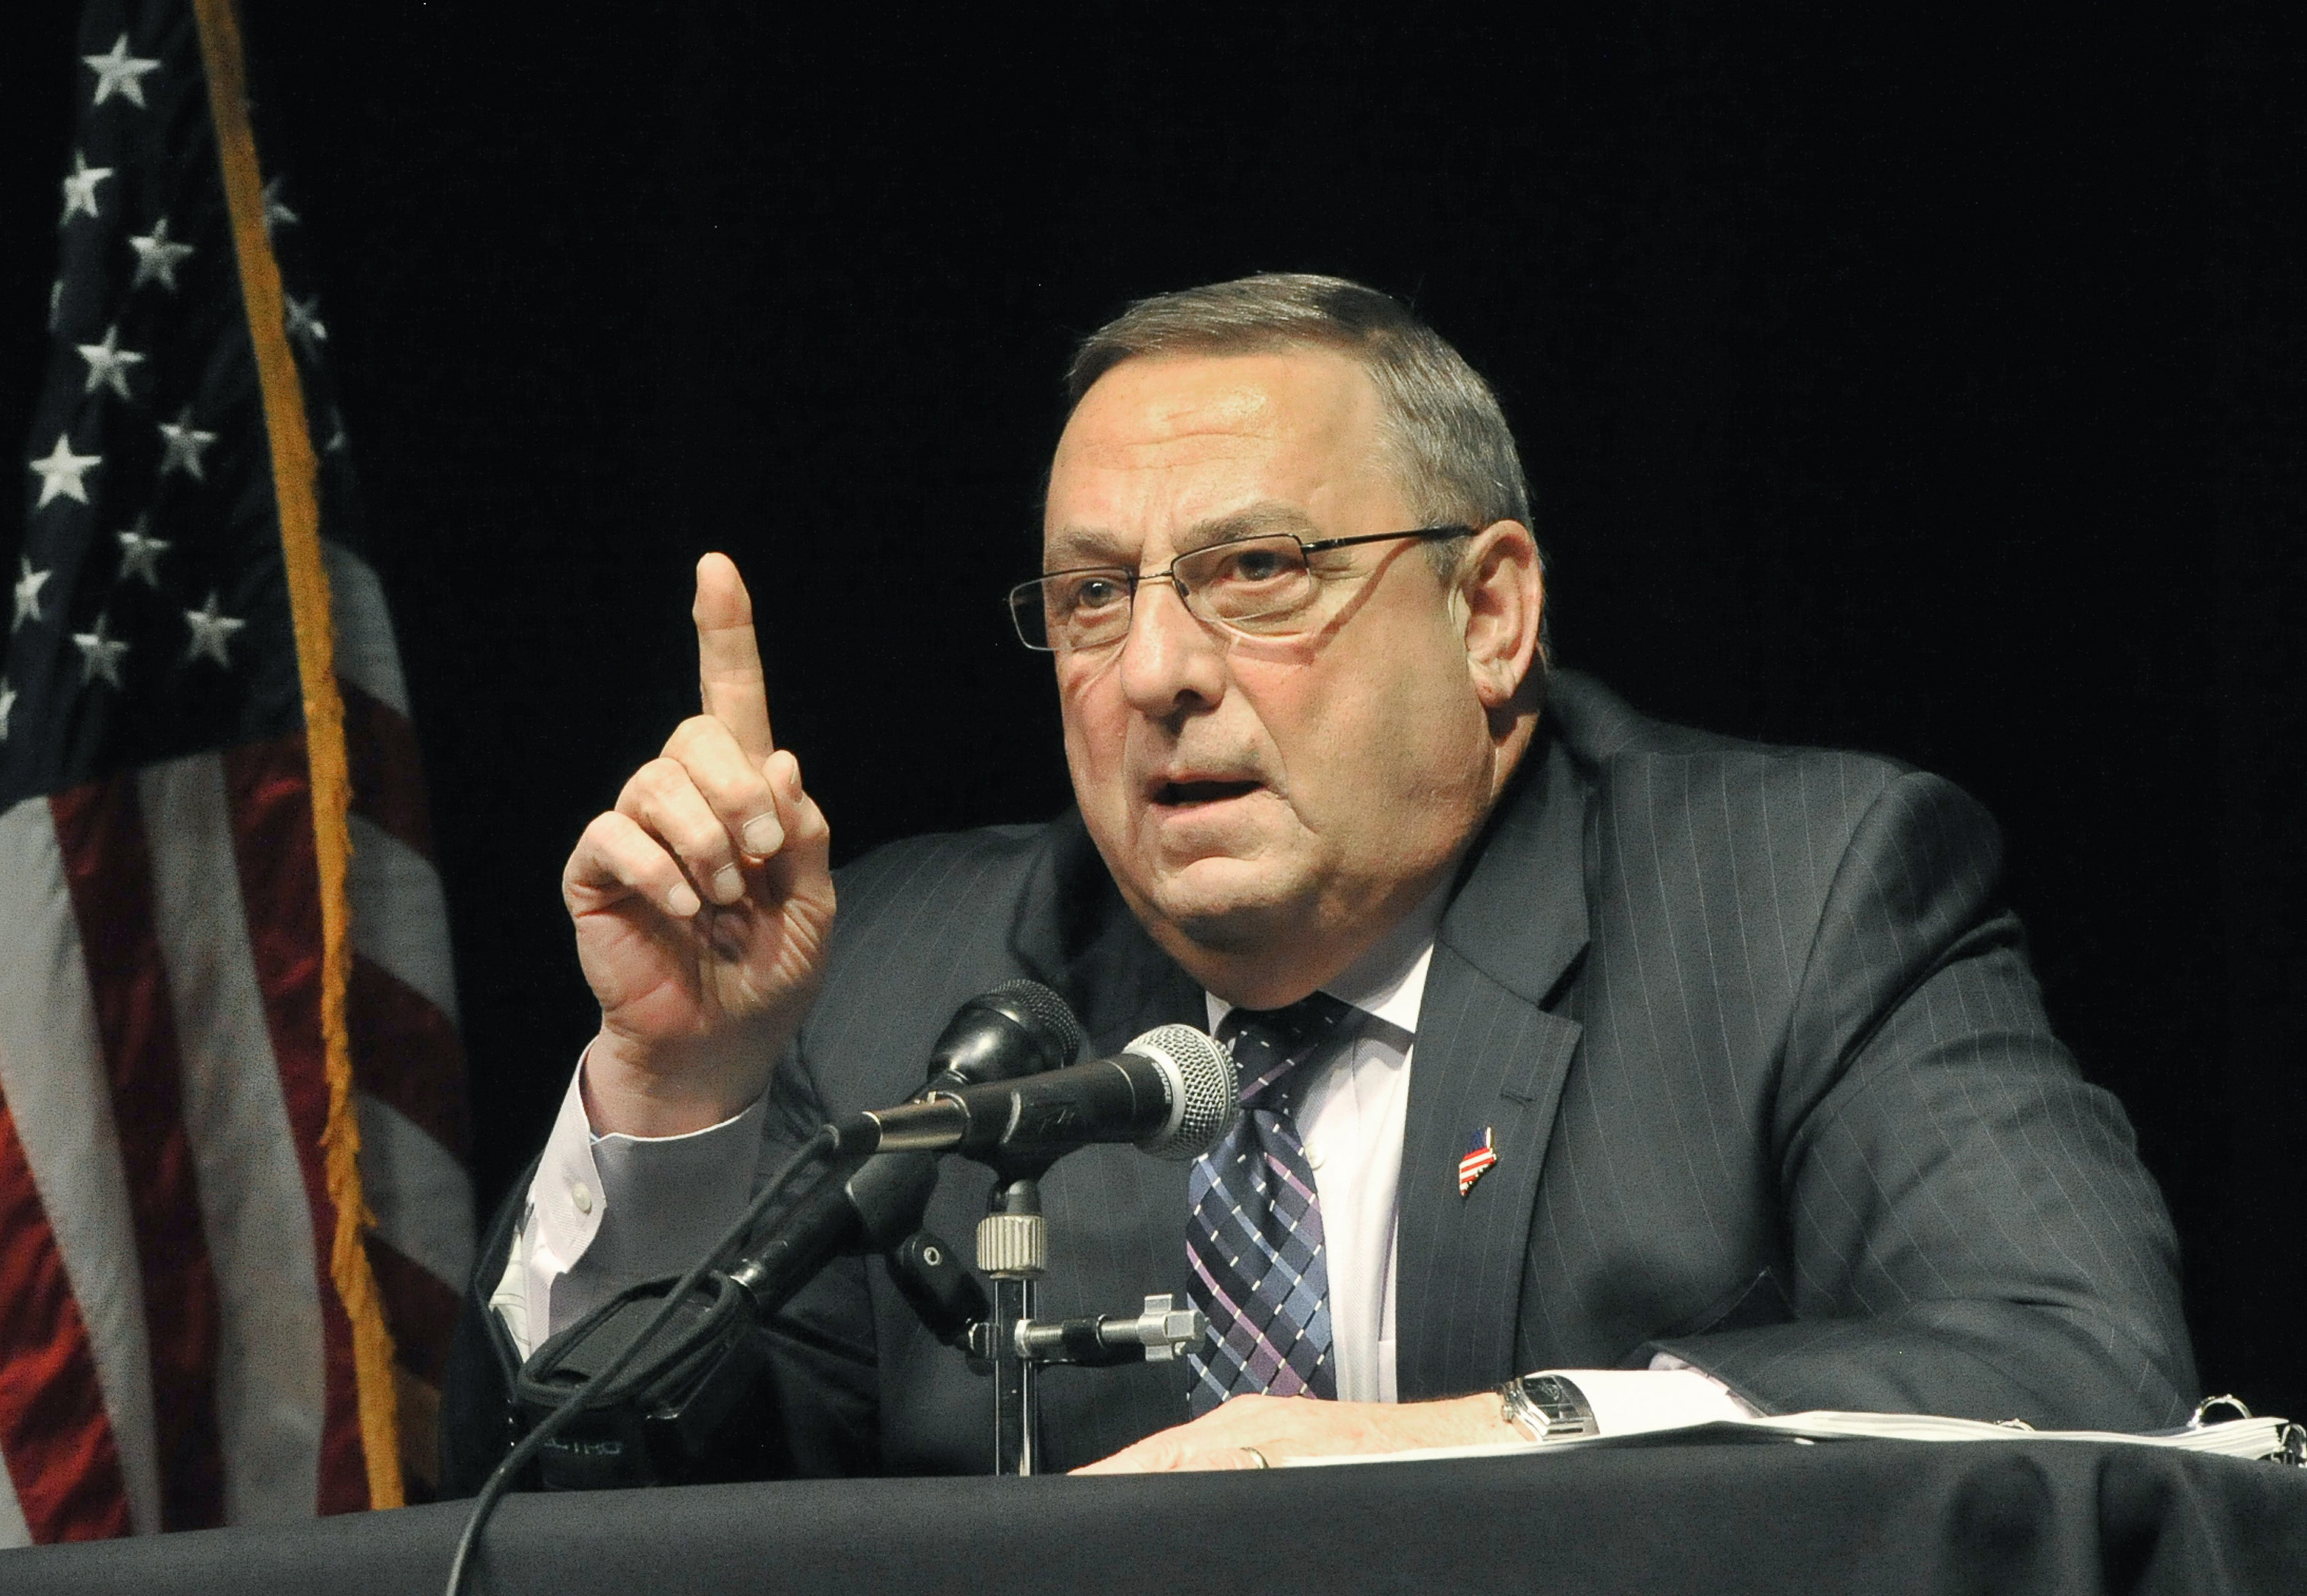 Governor Paul LePage holds a Town Hall Meeting